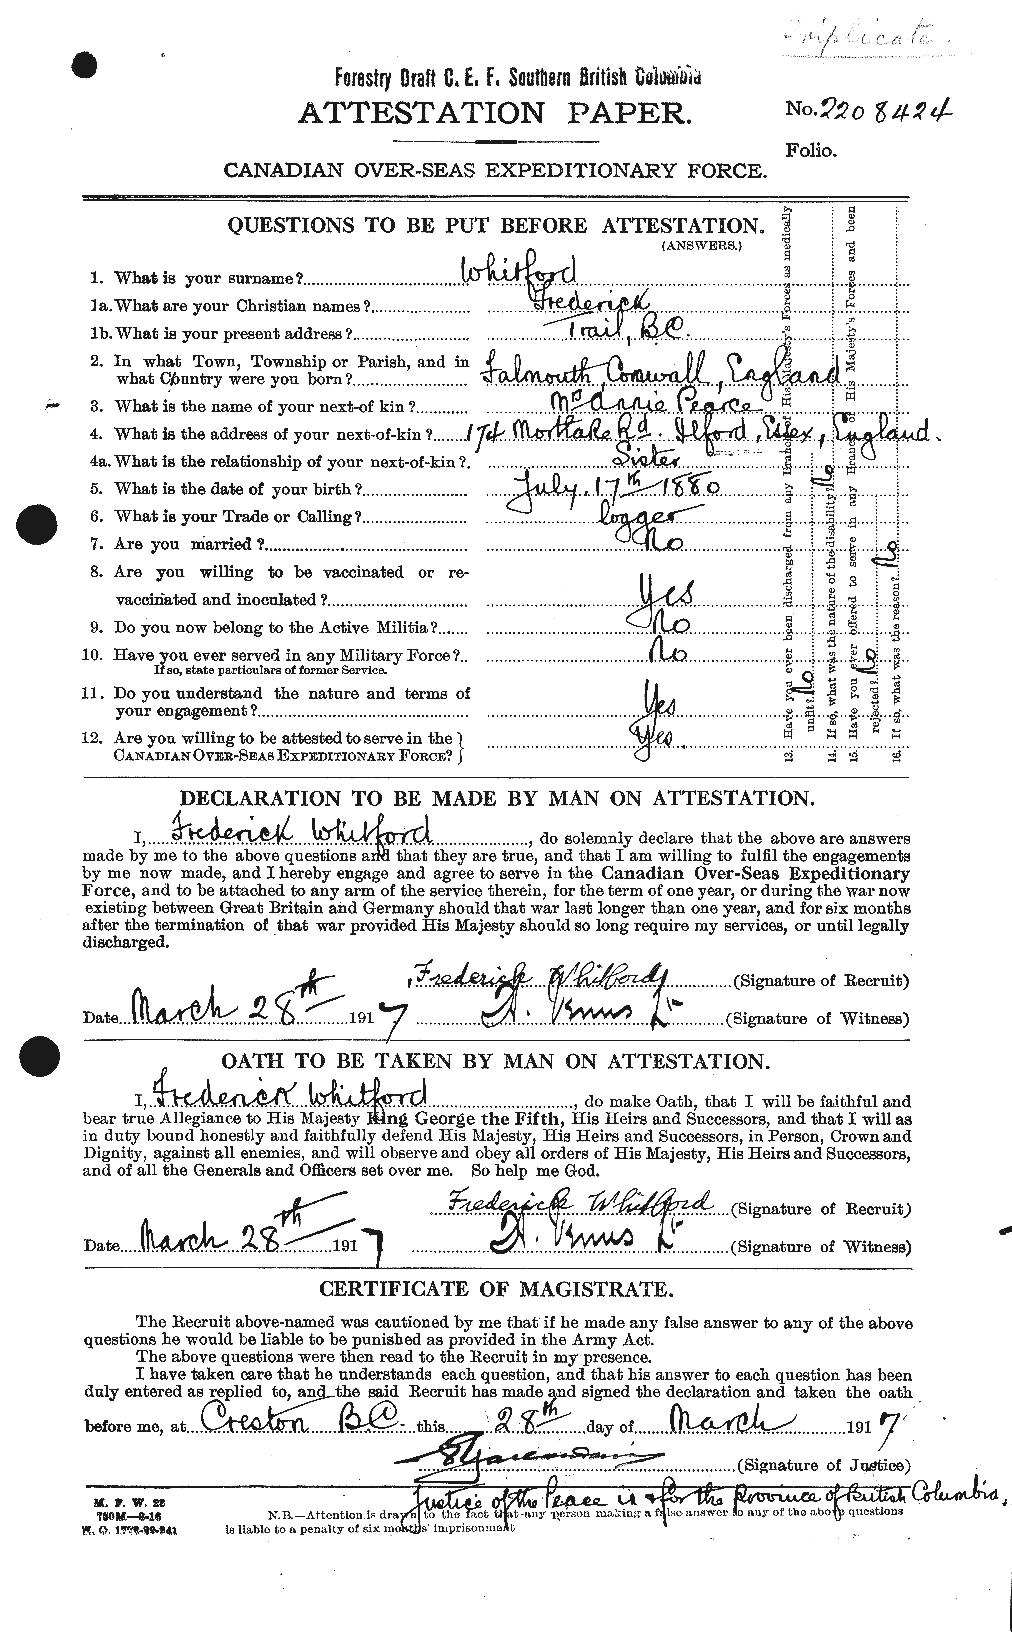 Personnel Records of the First World War - CEF 670756a